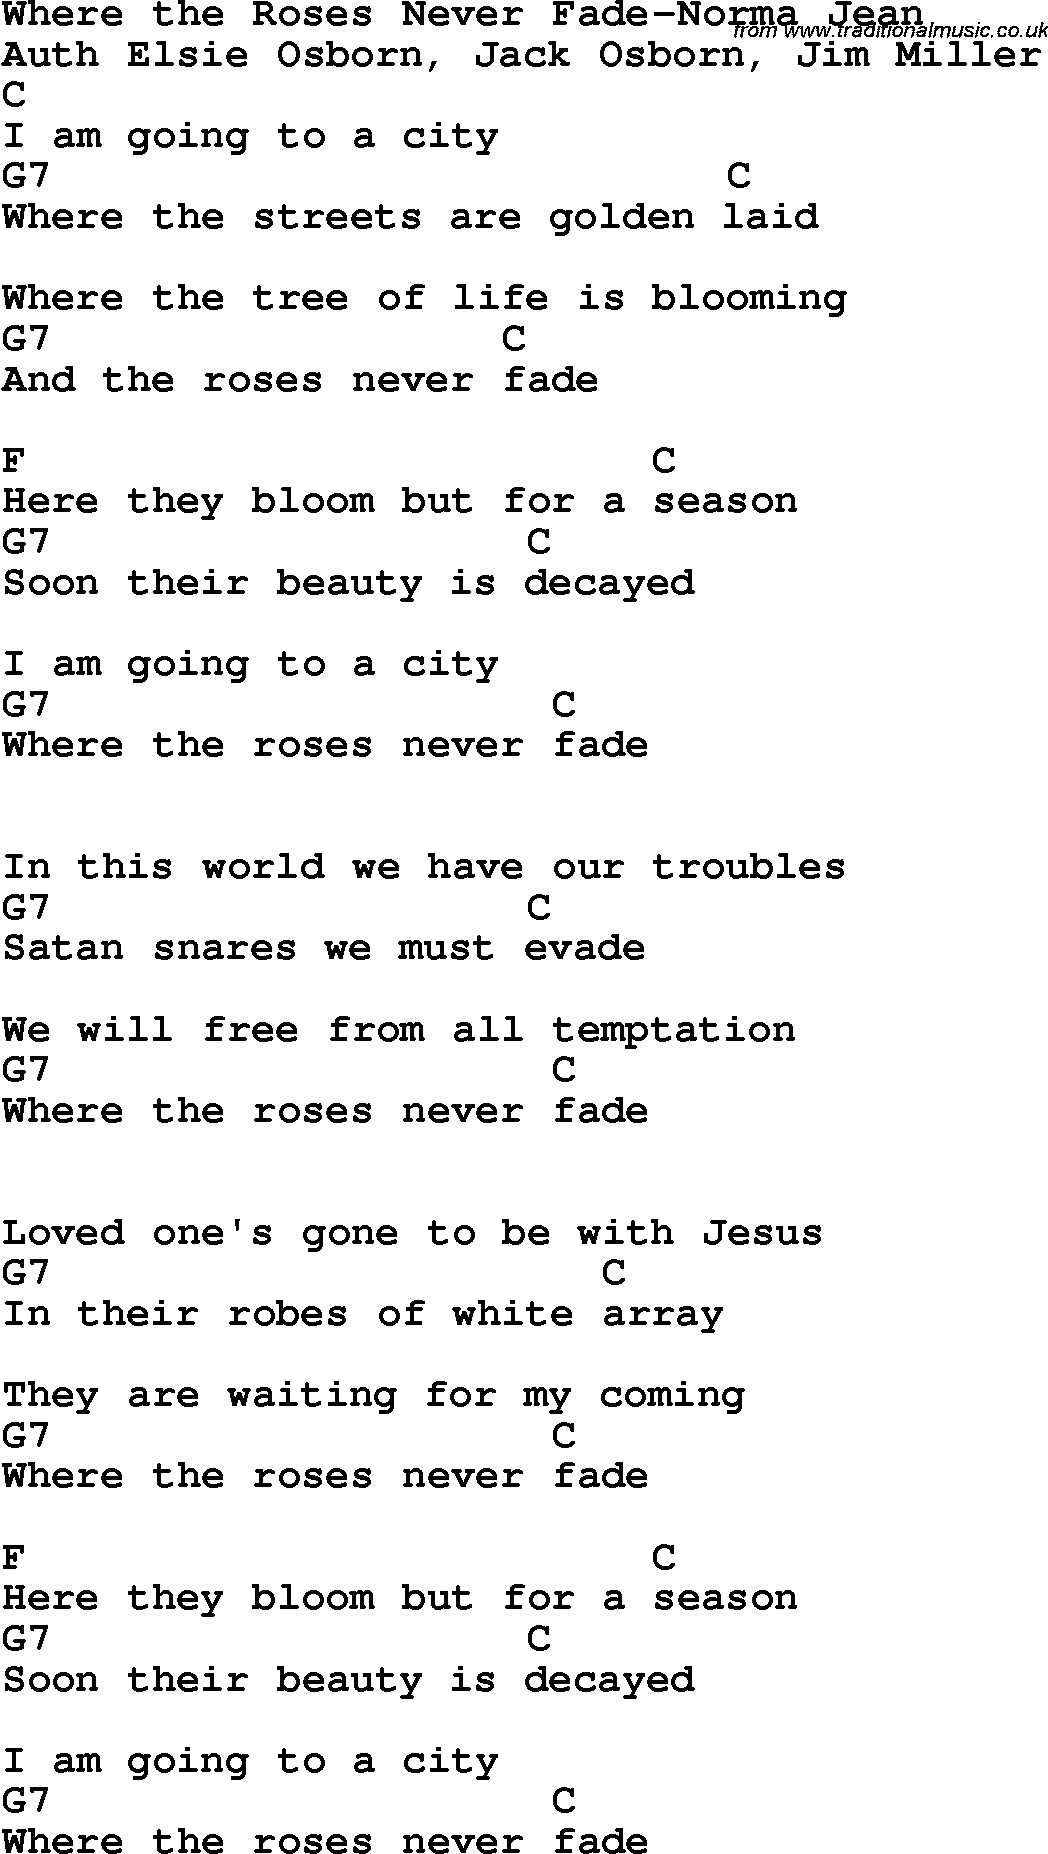 Country, Southern and Bluegrass Gospel Song Where the Roses Never Fade-Norma Jean lyrics and chords